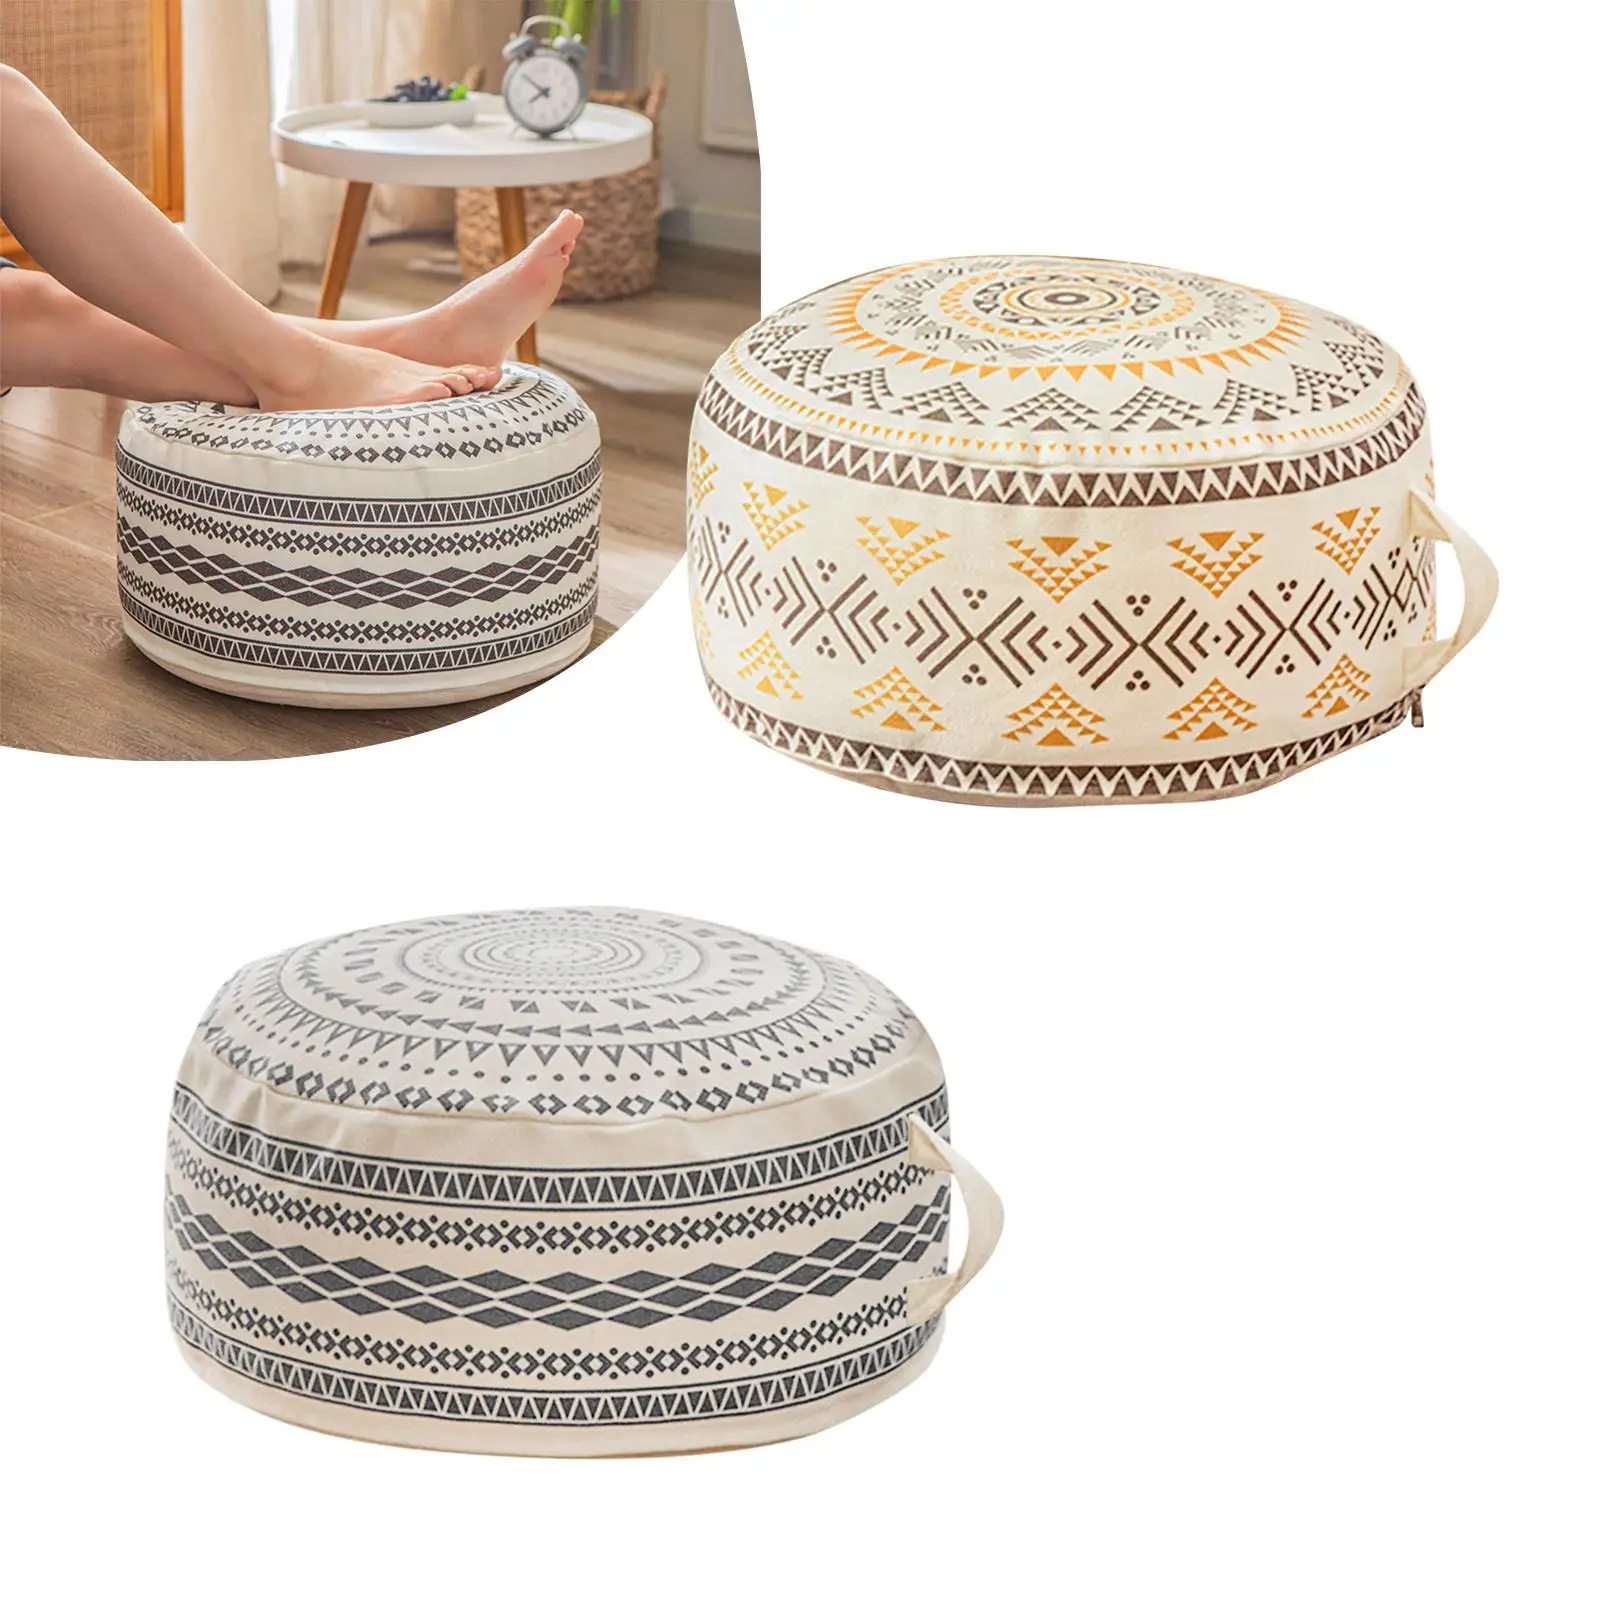 Large Pouf cover Decoration Ottomans Footstools Textured Foot Rest Cover Decorative Unfilled Pouf Foot Stool Cubes